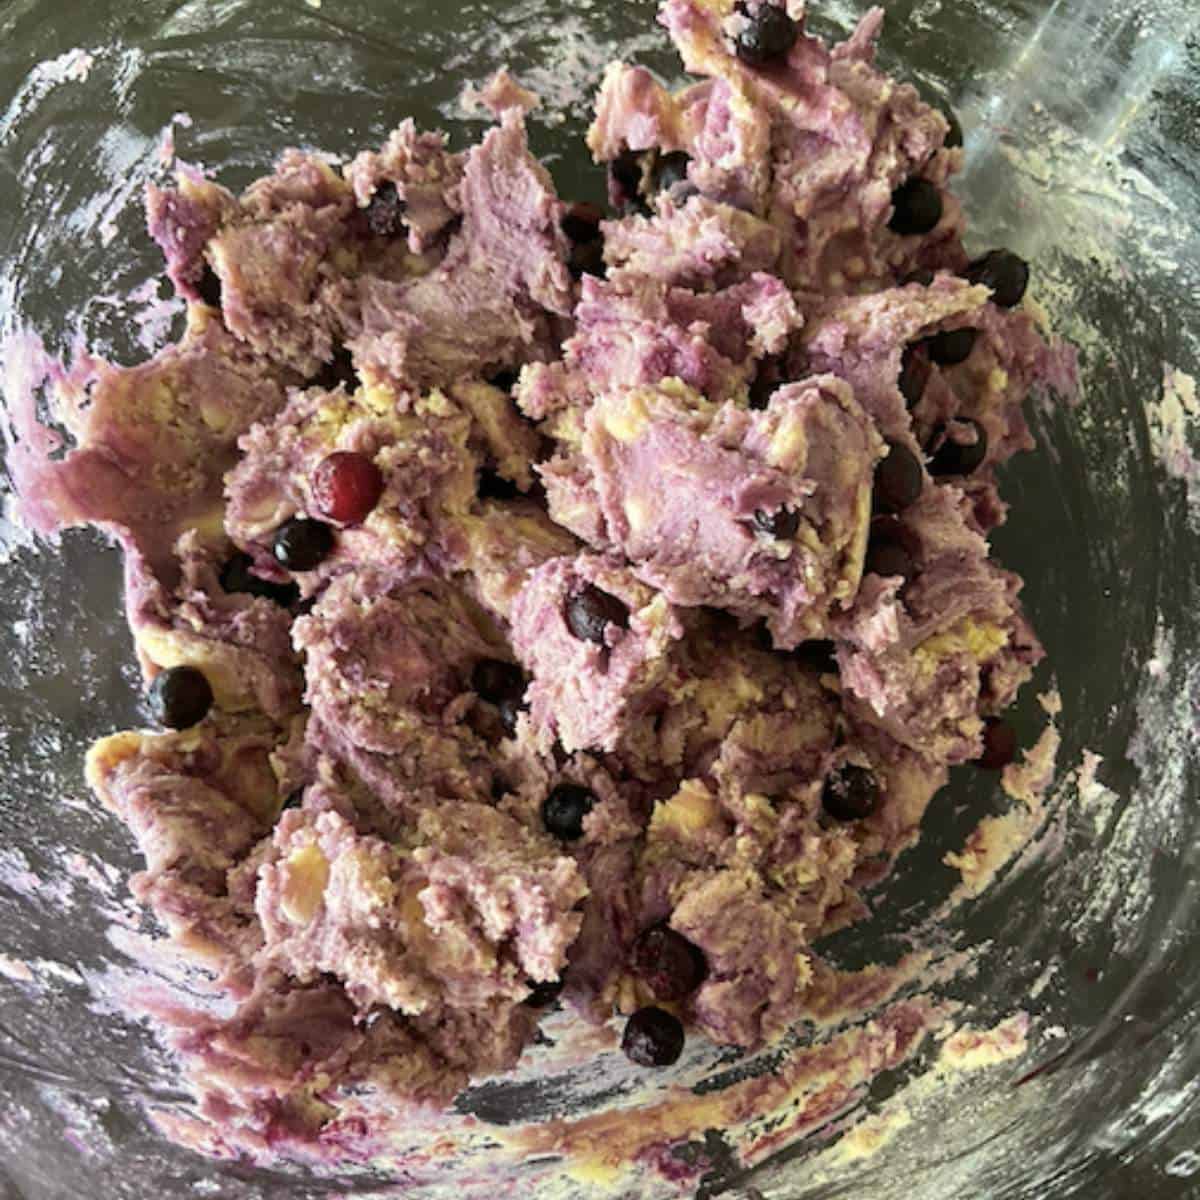 Frozen blueberries added to cookie batter.